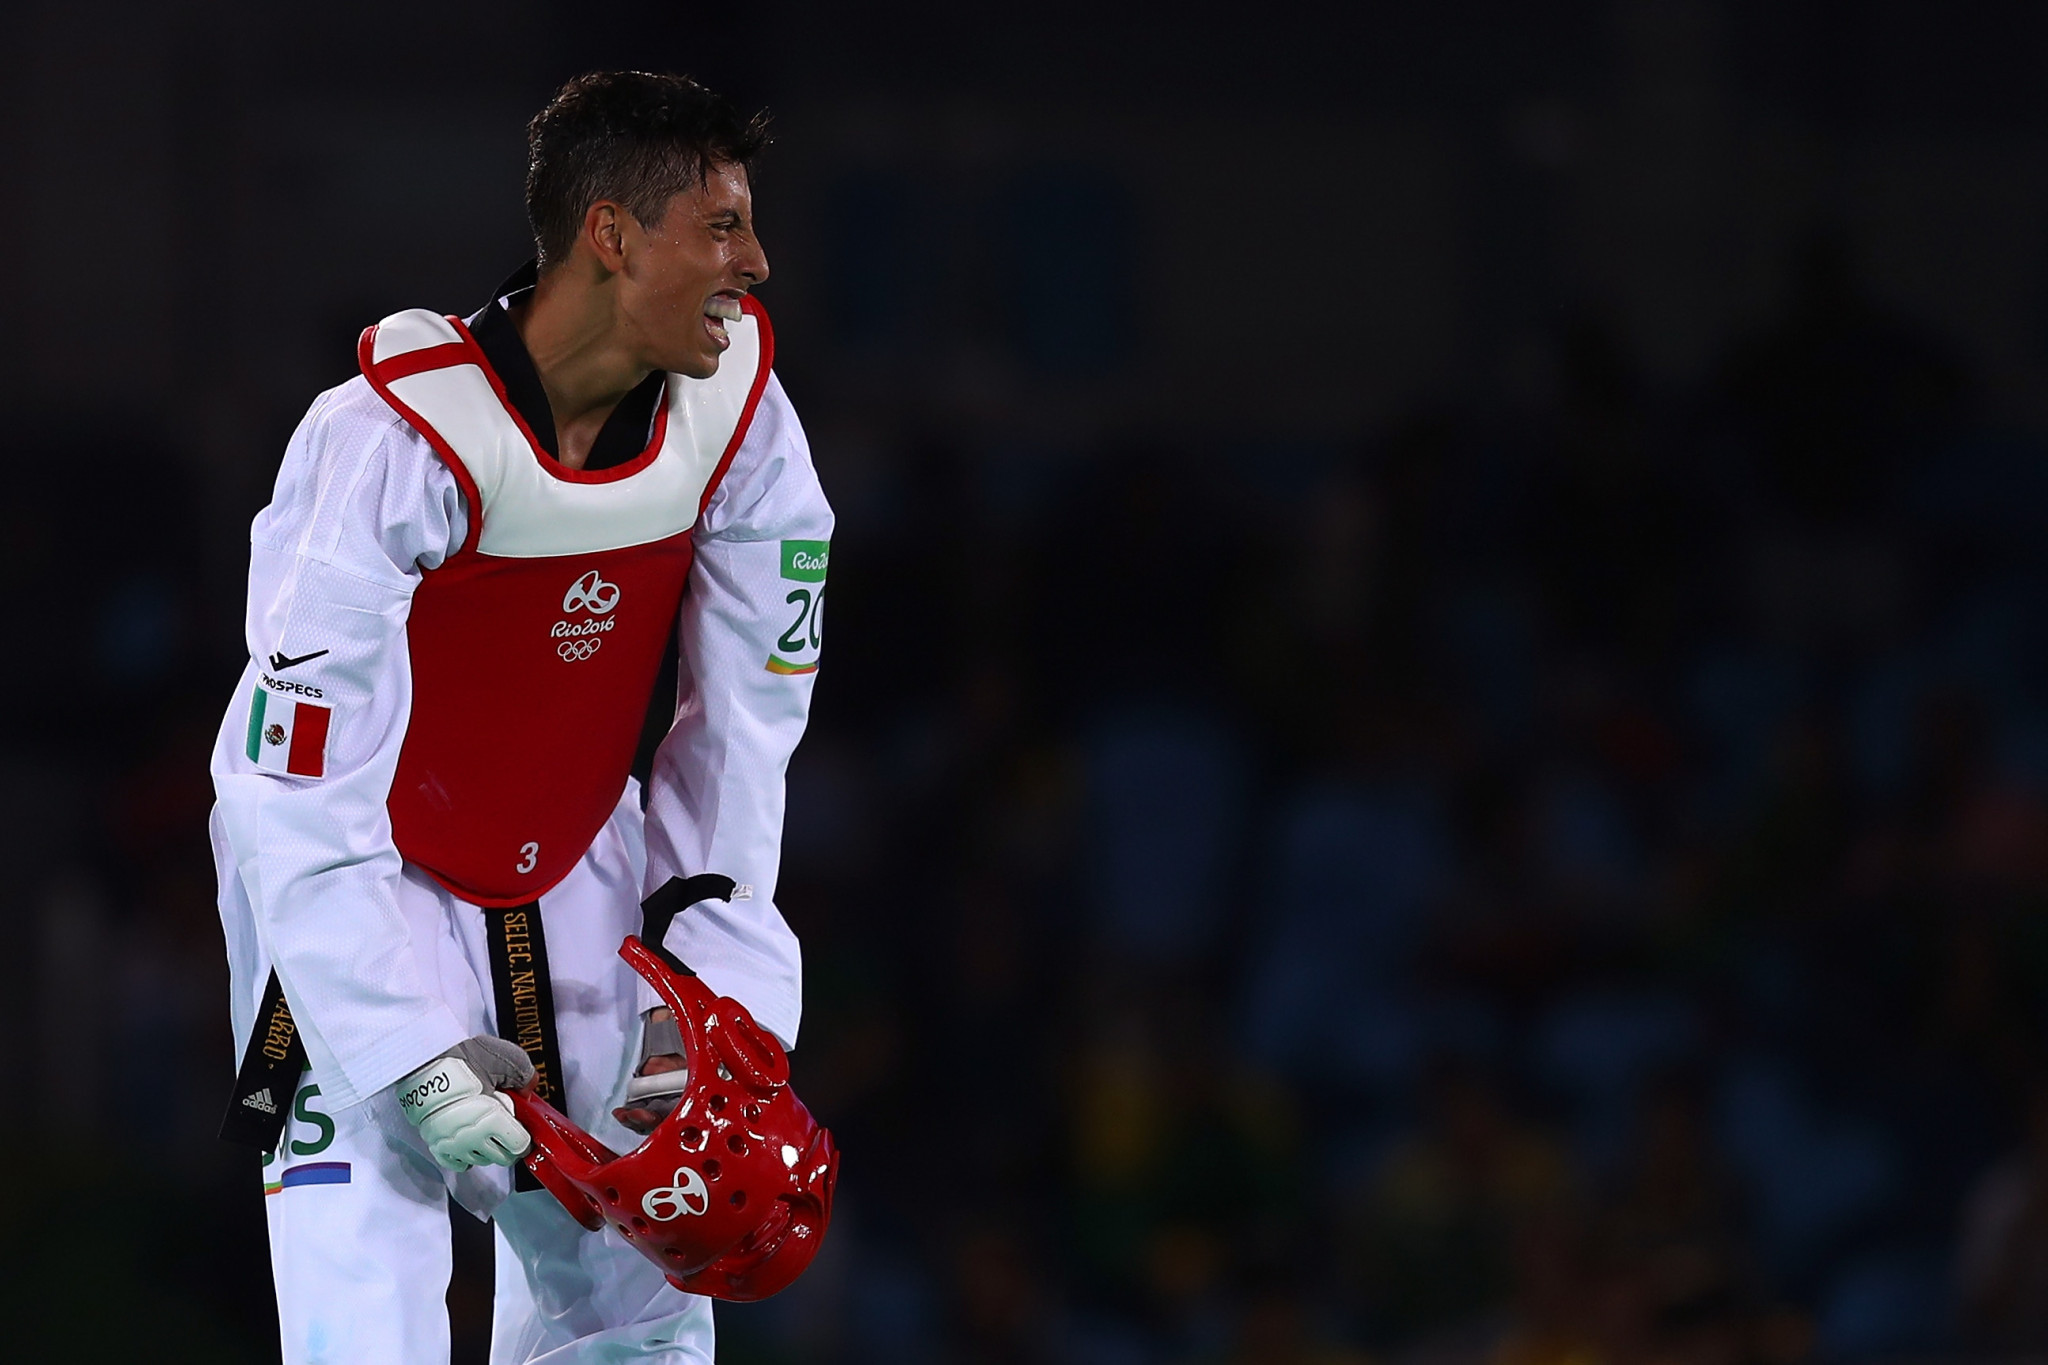 Carlos Navarro was among the winners for Mexico at the Pan American Taekwondo Championships ©Getty Images